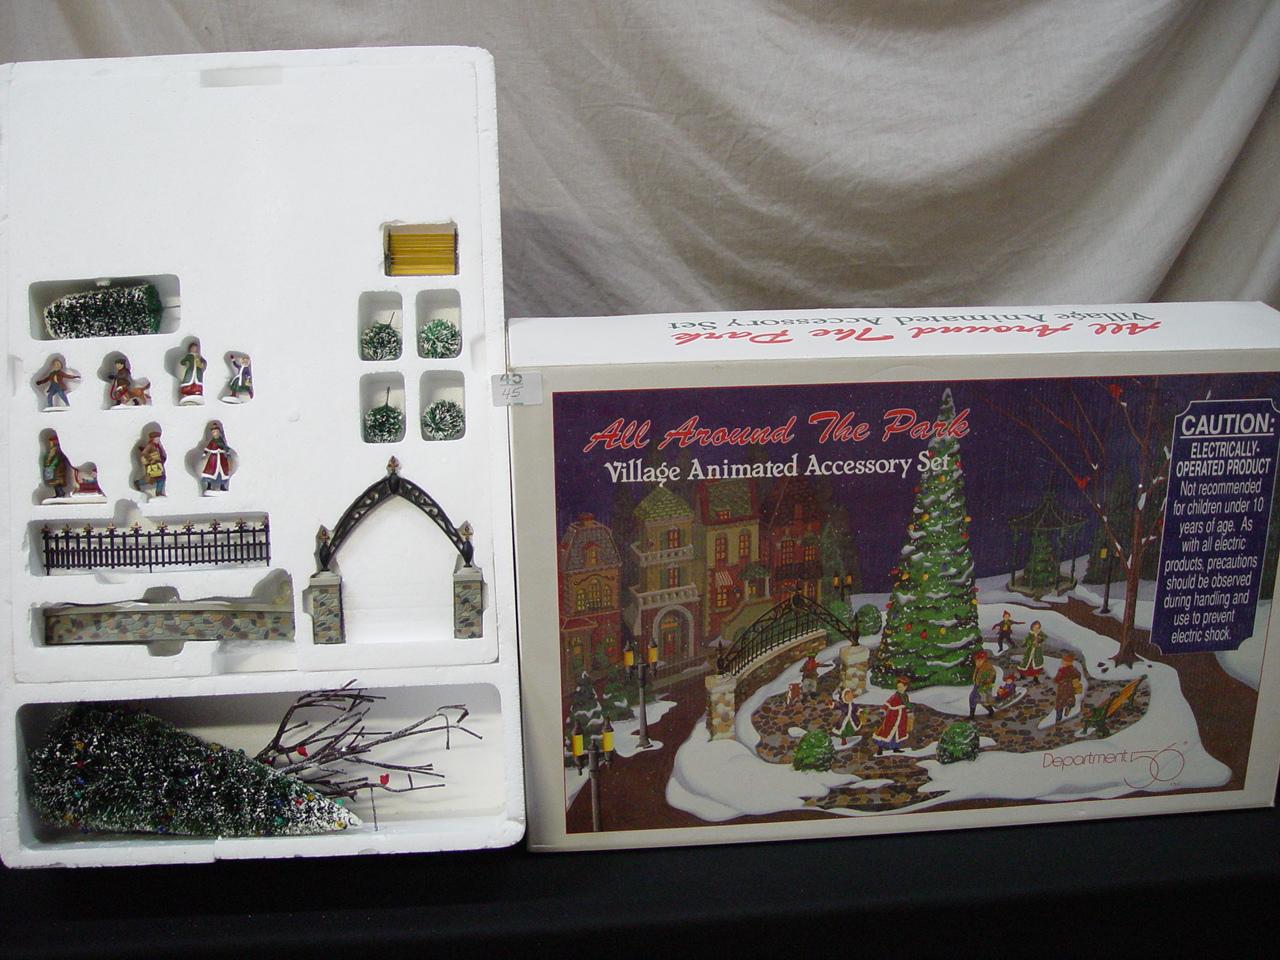 Village Animated Accessory Set, "All Around The Park"